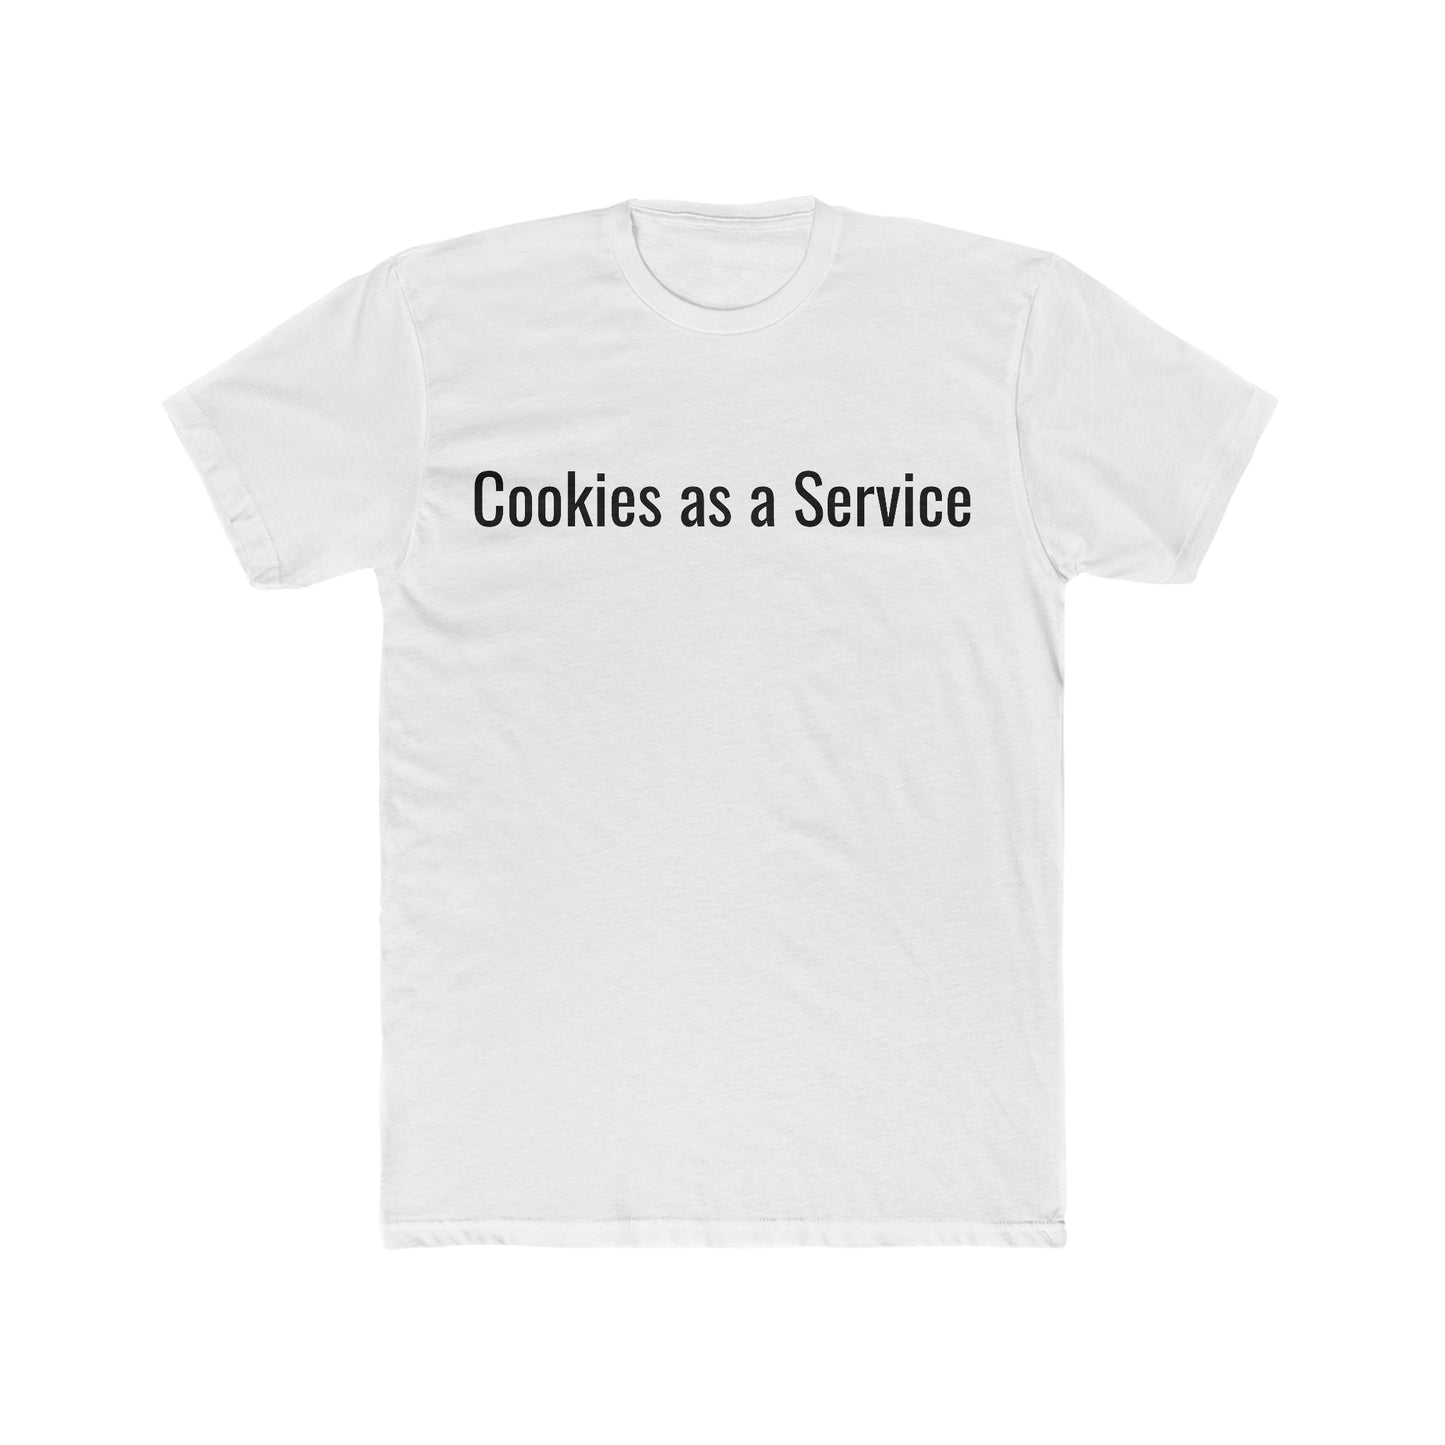 Cookies as a Service